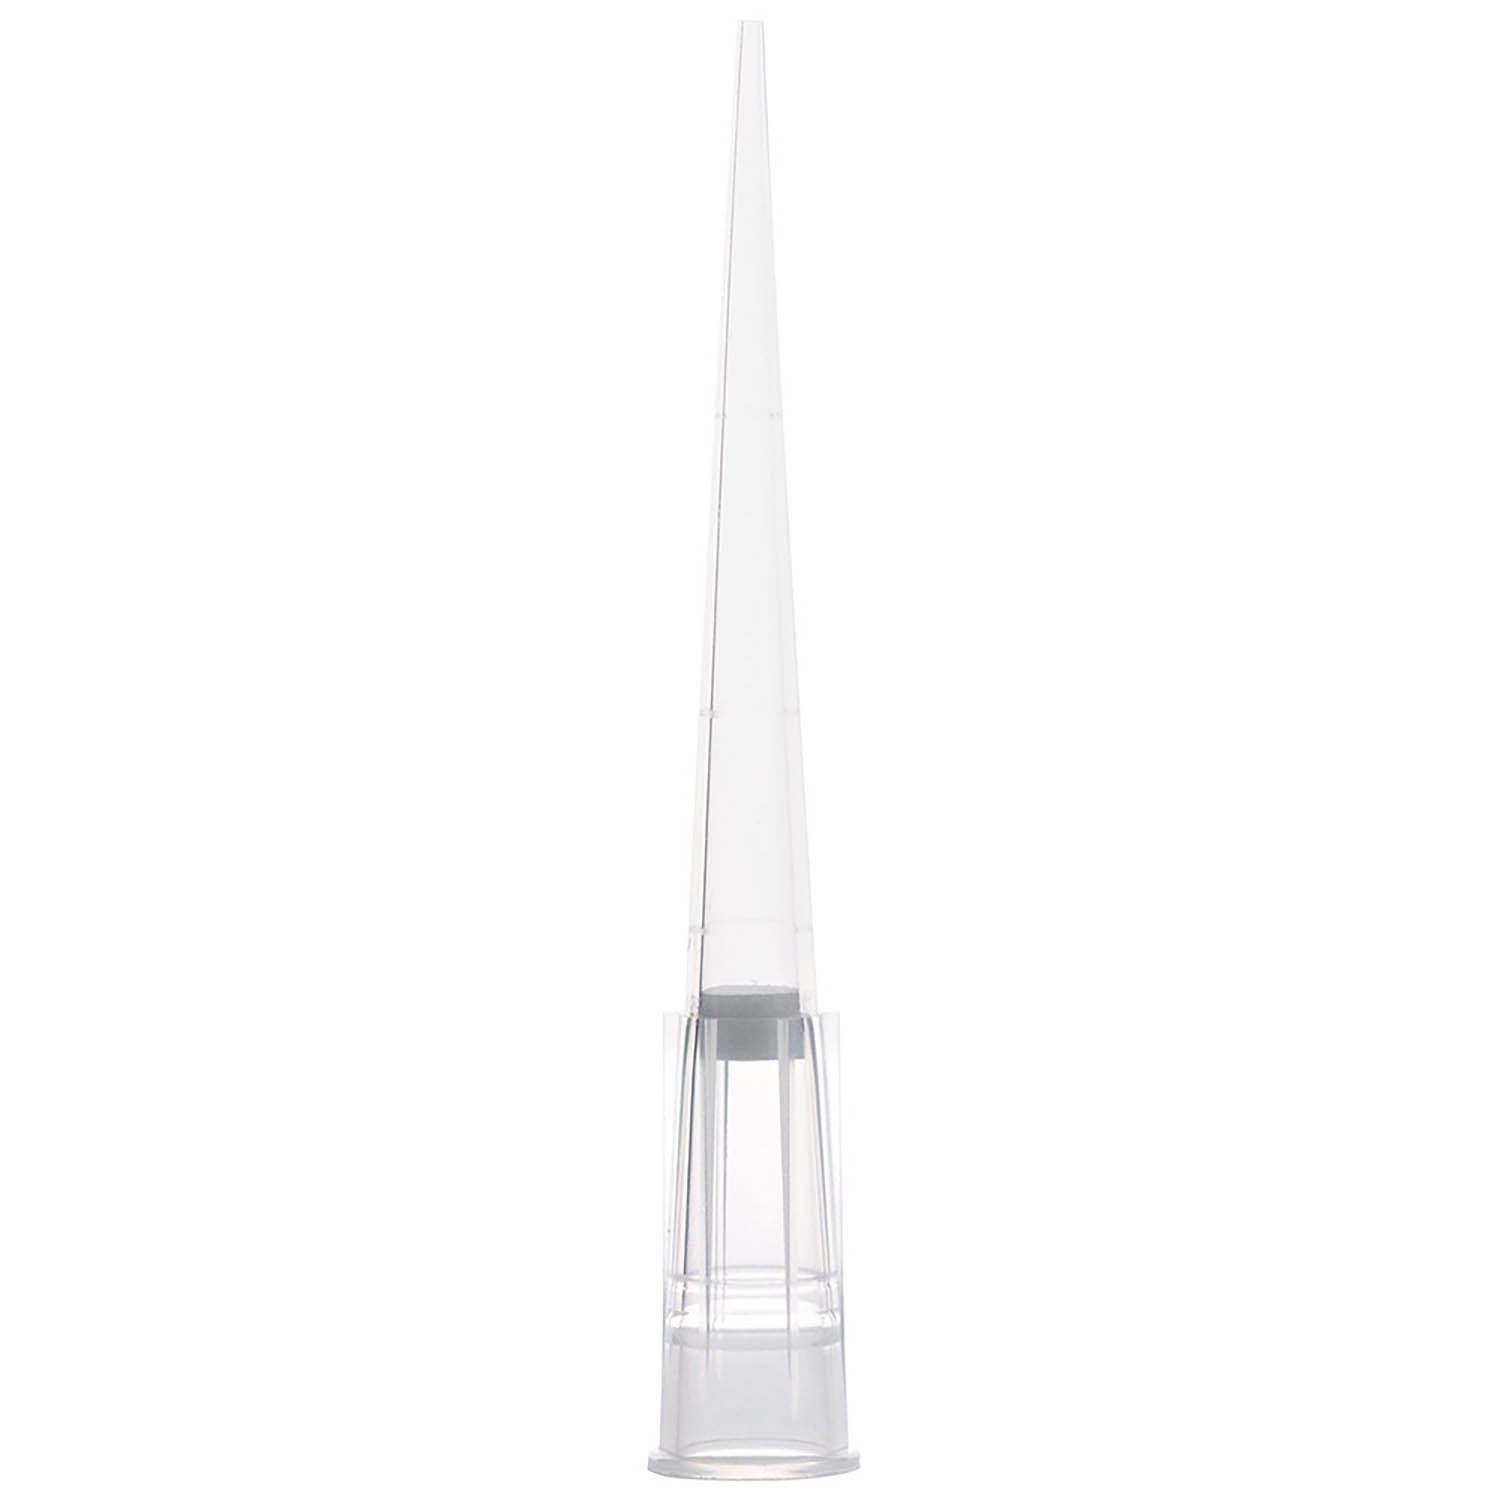 1uL-100uL Certified Universal Low Retention Graduated Filter Pipette Tip - Natural, Sterile, 54mm, Case of 1920